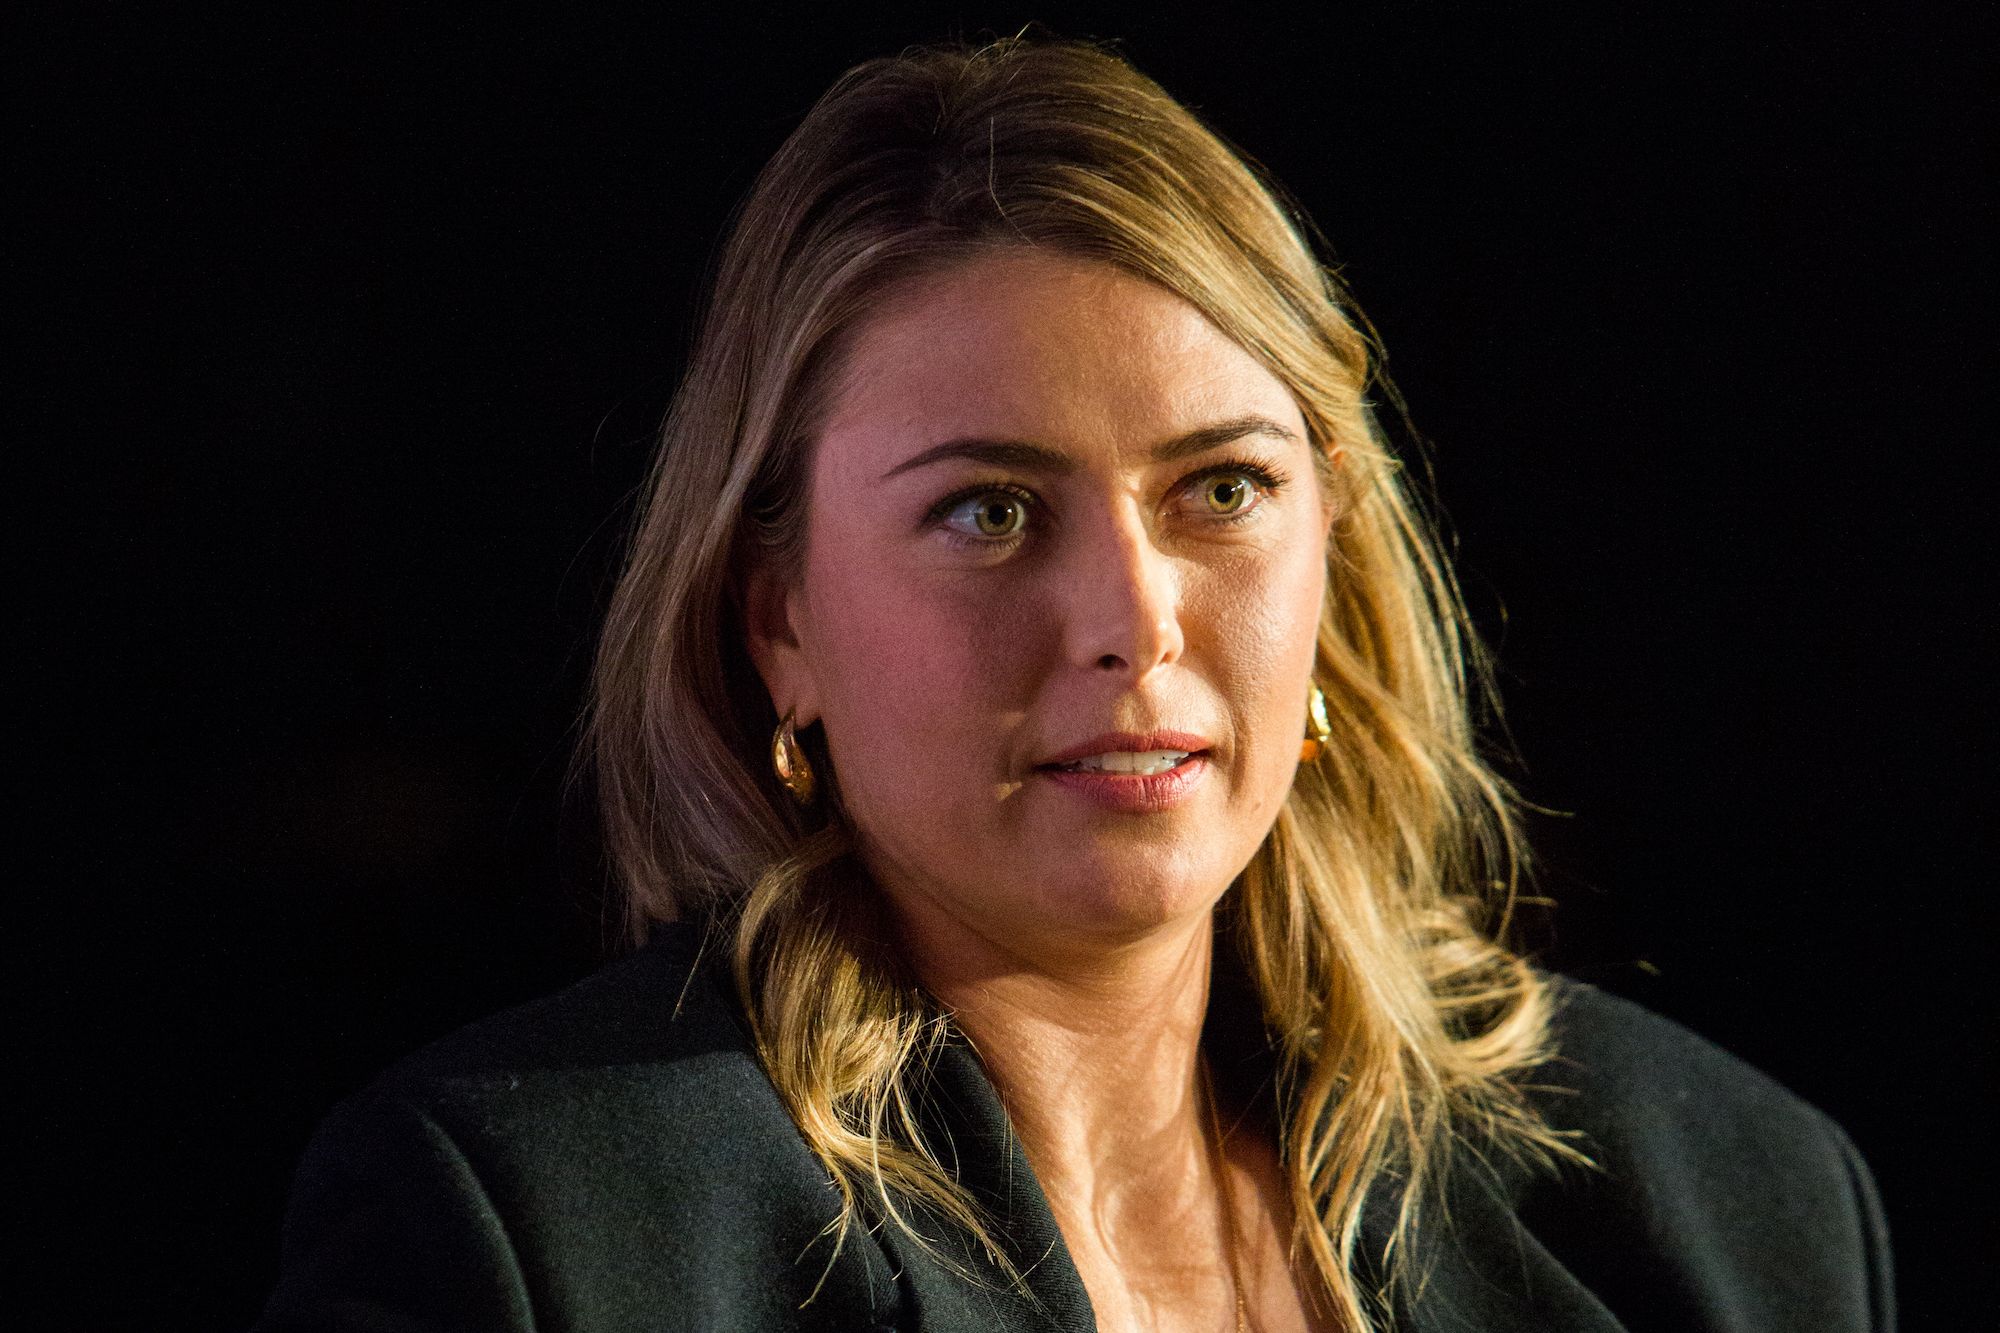 Maria Sharapova on Building Her Brand and Businesses